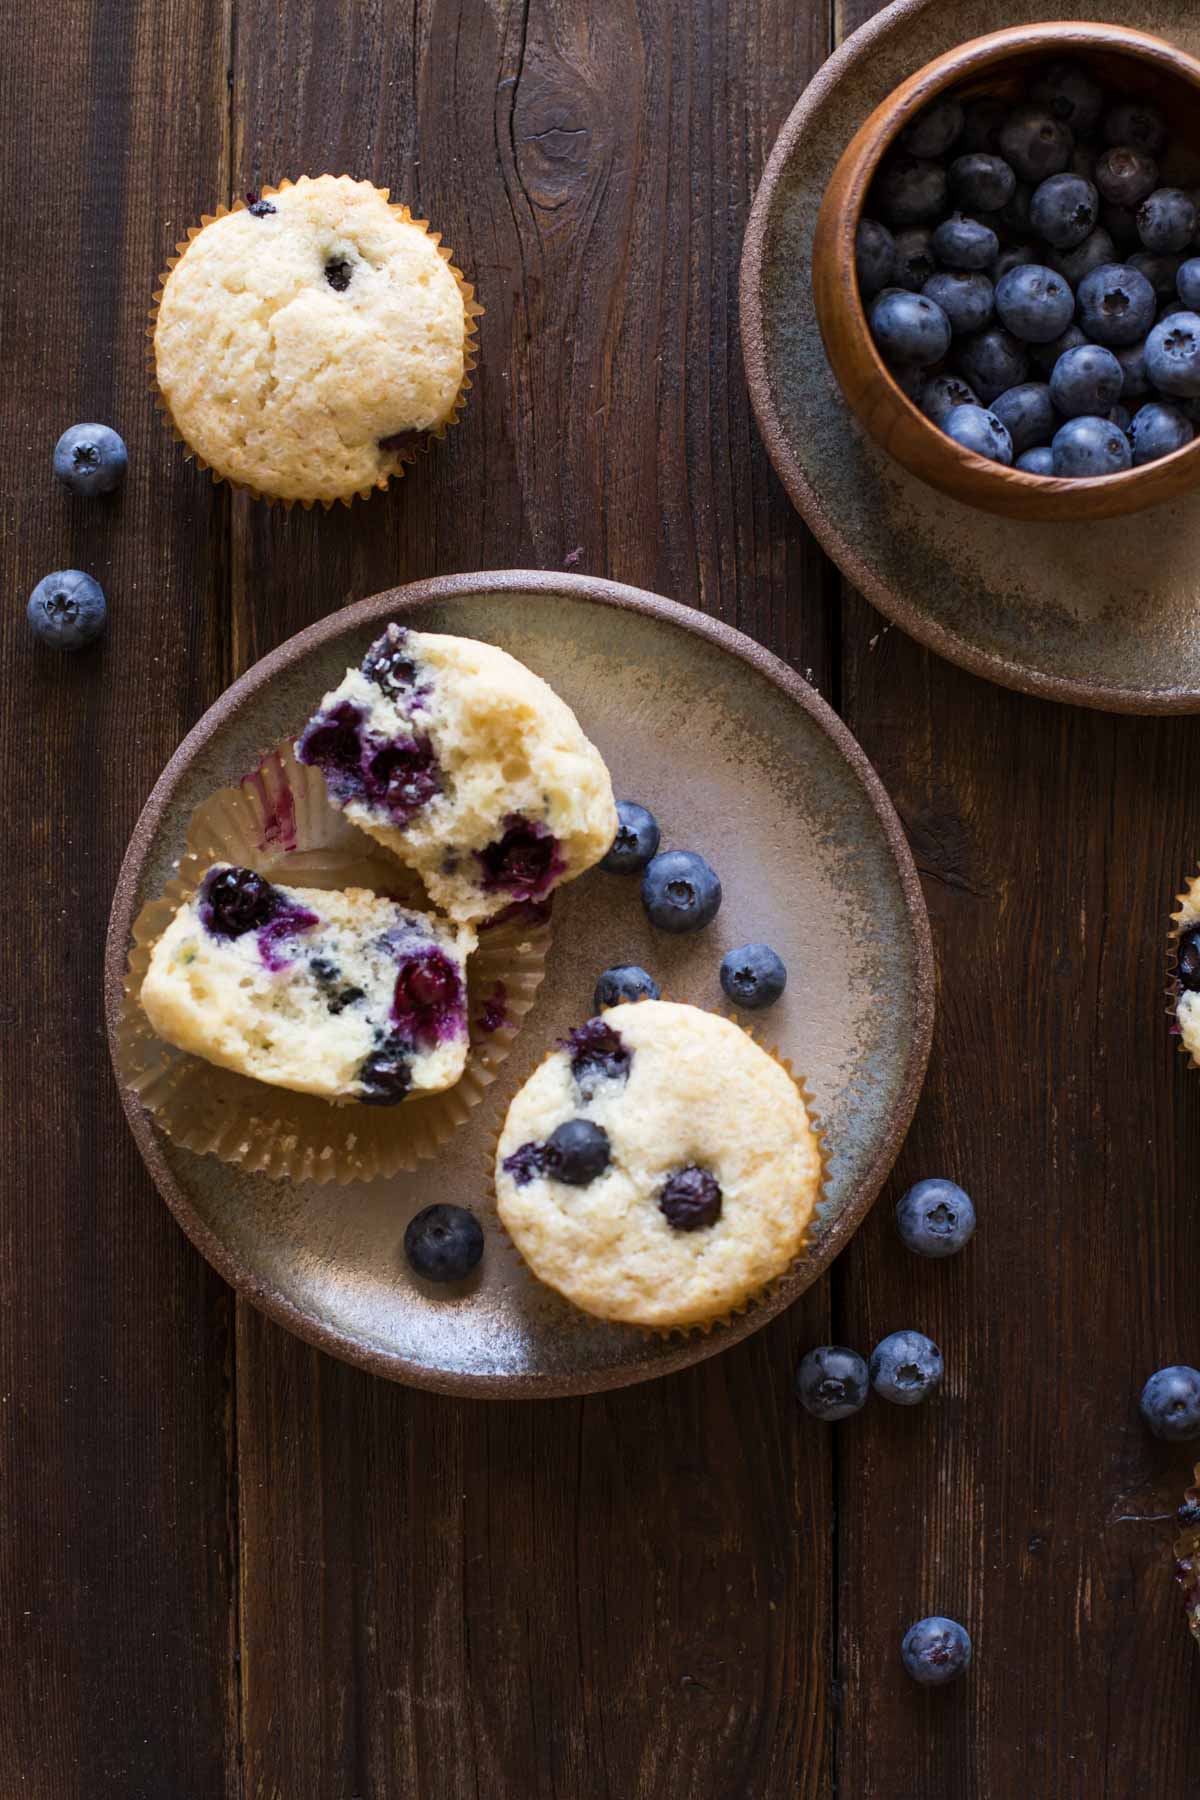 A Vanilla Blueberry Buttermilk Muffin split in half, sitting on a plate with a whole muffin and some blueberries, with a muffin and blueberries near the plate, and a wood bowl of blueberries sitting on another plate. 